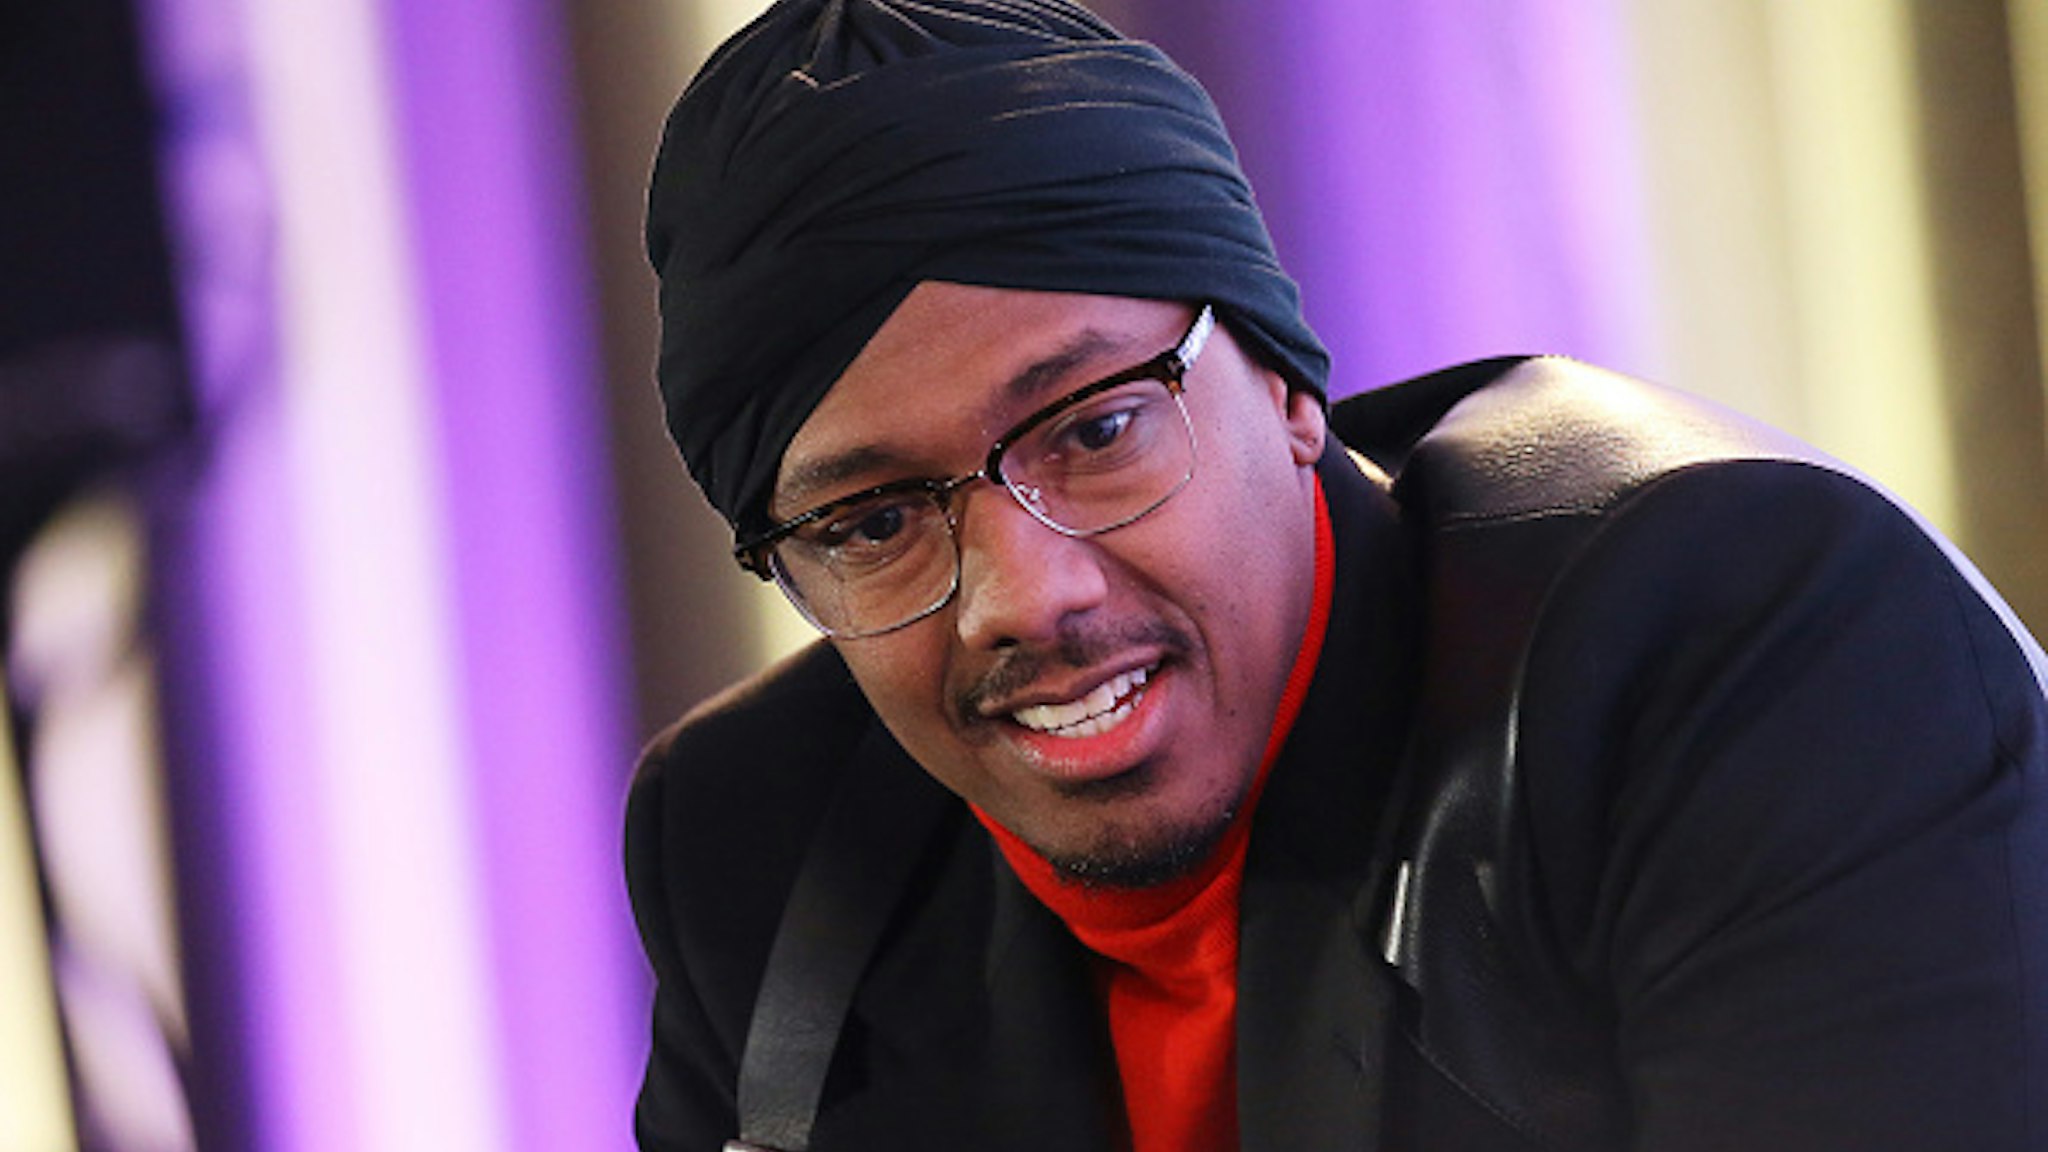 HOLLYWOOD, CALIFORNIA - NOVEMBER 21: Nick Cannon speaks onstage during the Hollywood Chamber of Commerce 2019 State of The Entertainment Industry Conference held at Lowes Hollywood Hotel on November 21, 2019 in Hollywood, California.